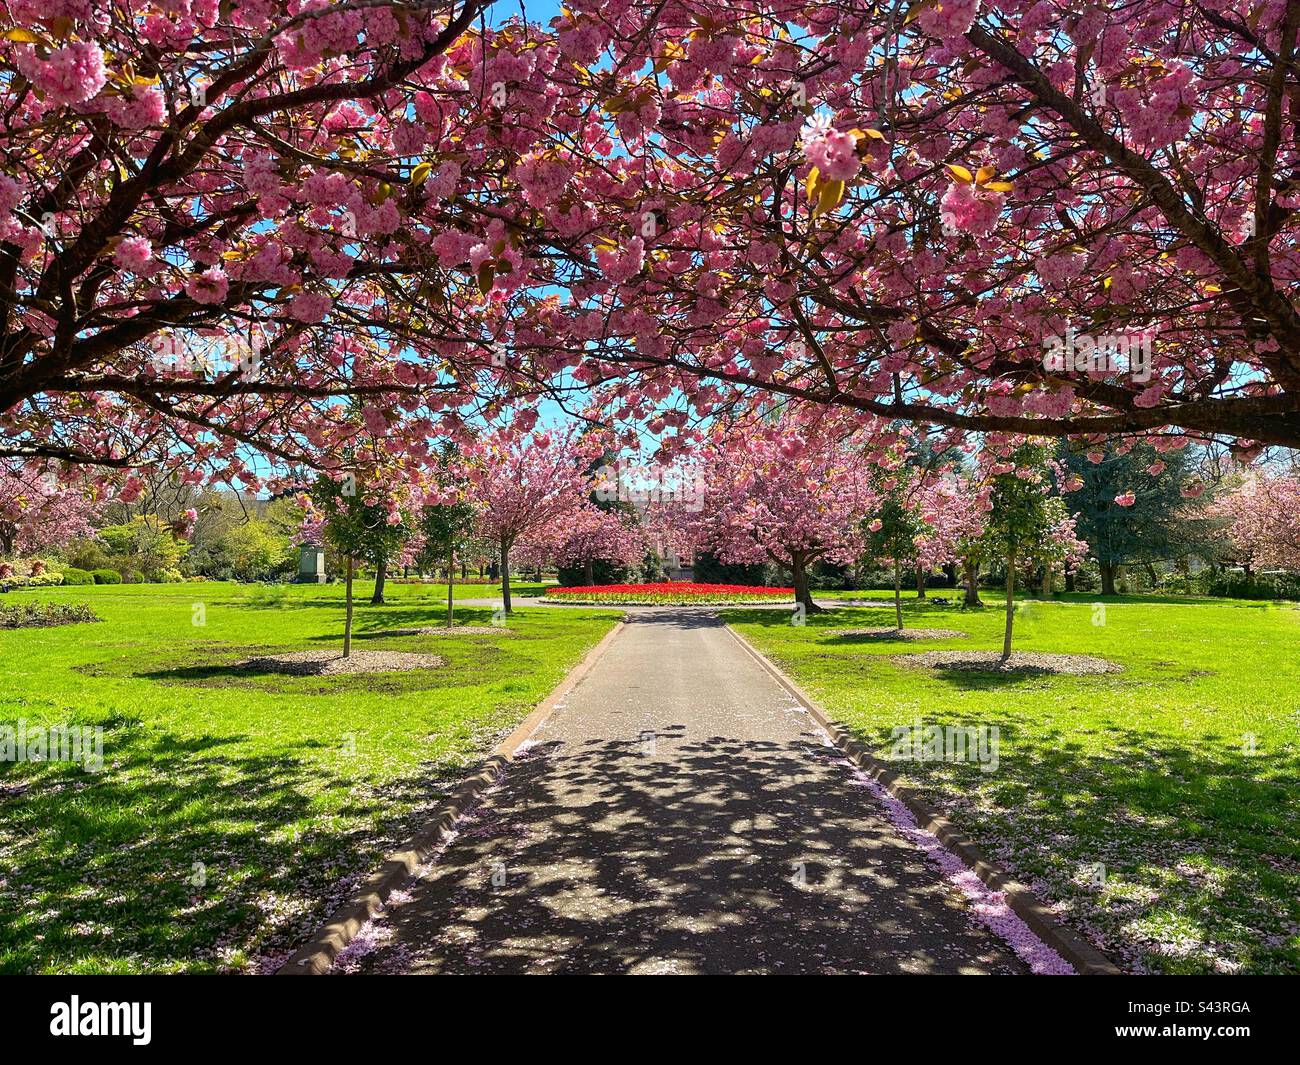 Scenic lands view of a public park in spring with the view framed by flowering Japanese cherry blossom trees. No people. Stock Photo